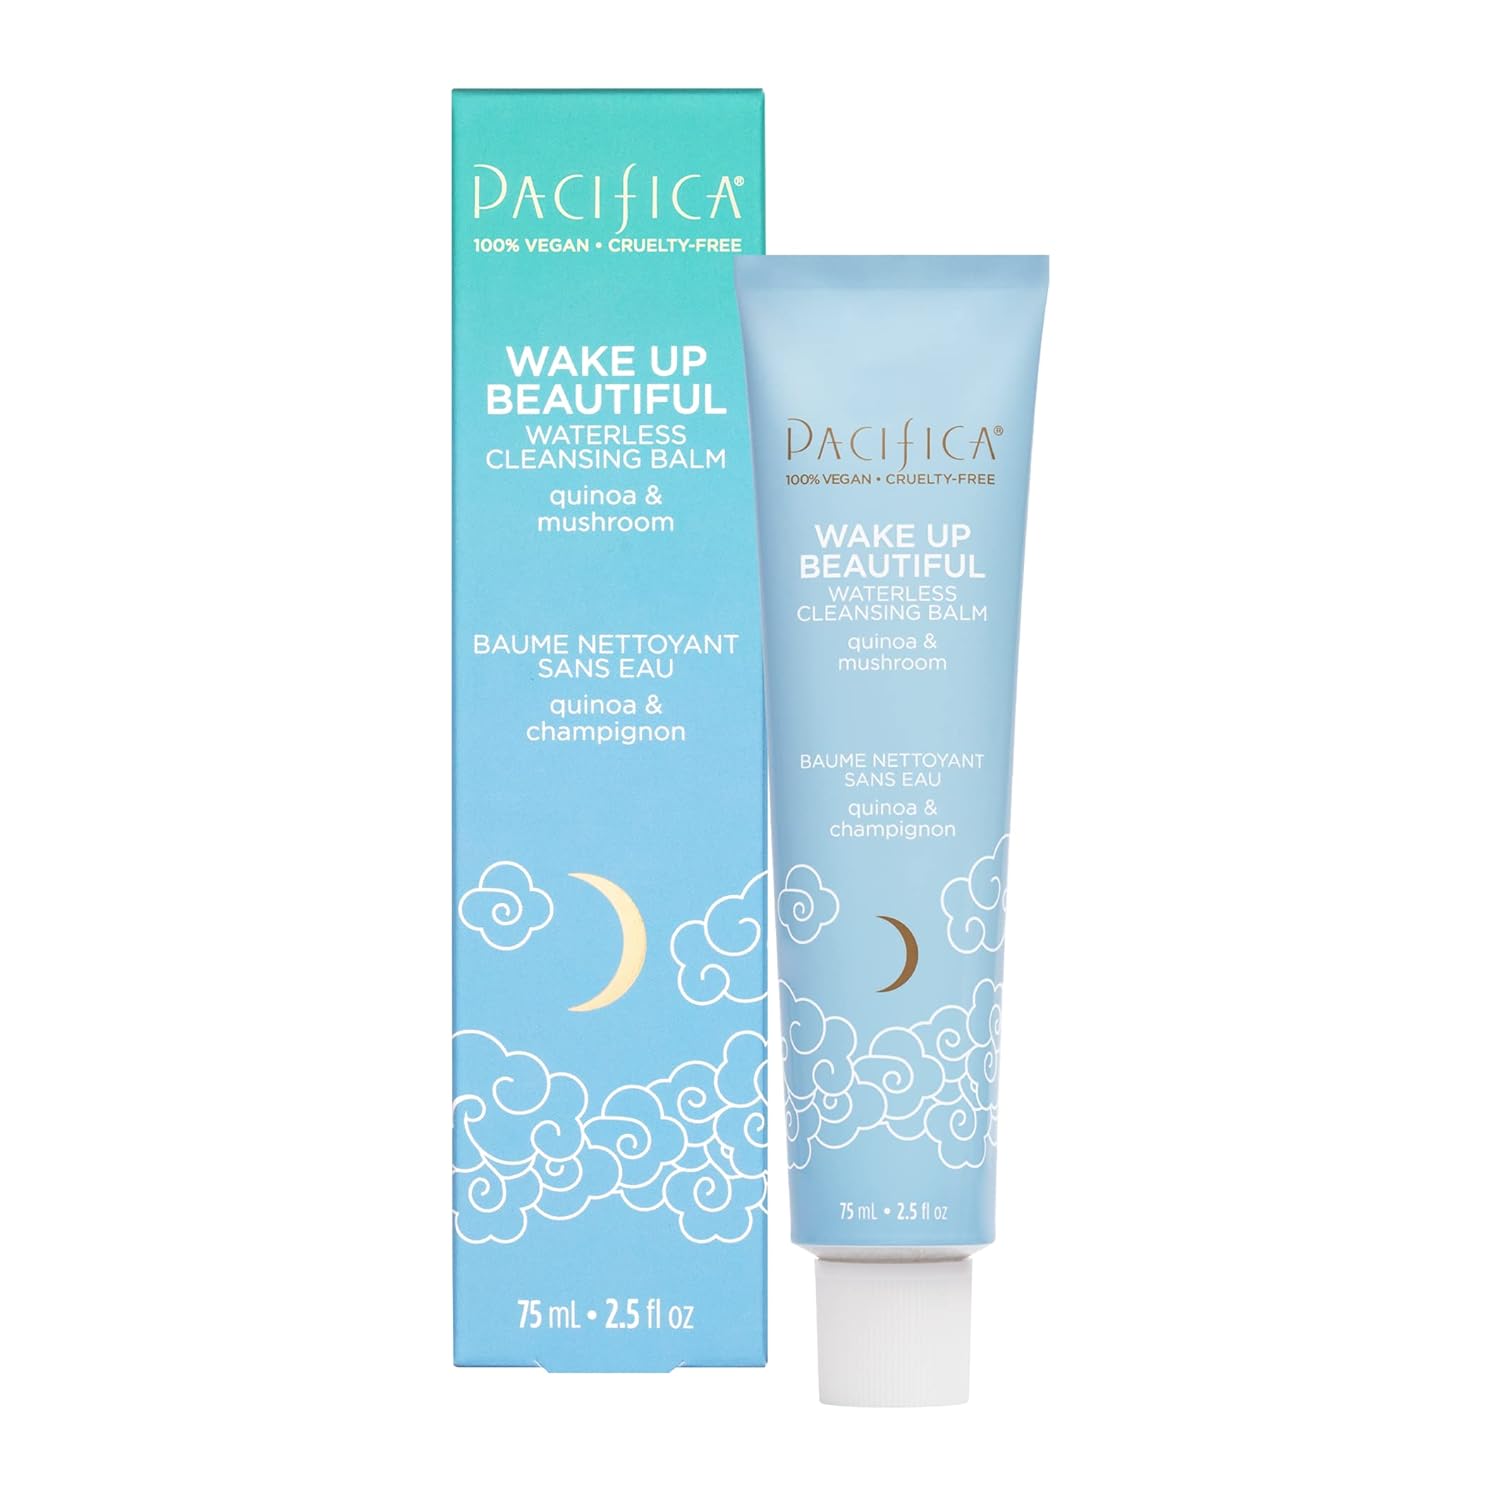 Pacifica Beauty, Wake Up Beautiful Cleansing Balm, Daily Cleanser & Face Wash, Waterless, Makeup Remover, For Dry & Sensitive Skin, No Oily Residue, Hydrating, Deeply Cleanses, Soothes, Calms